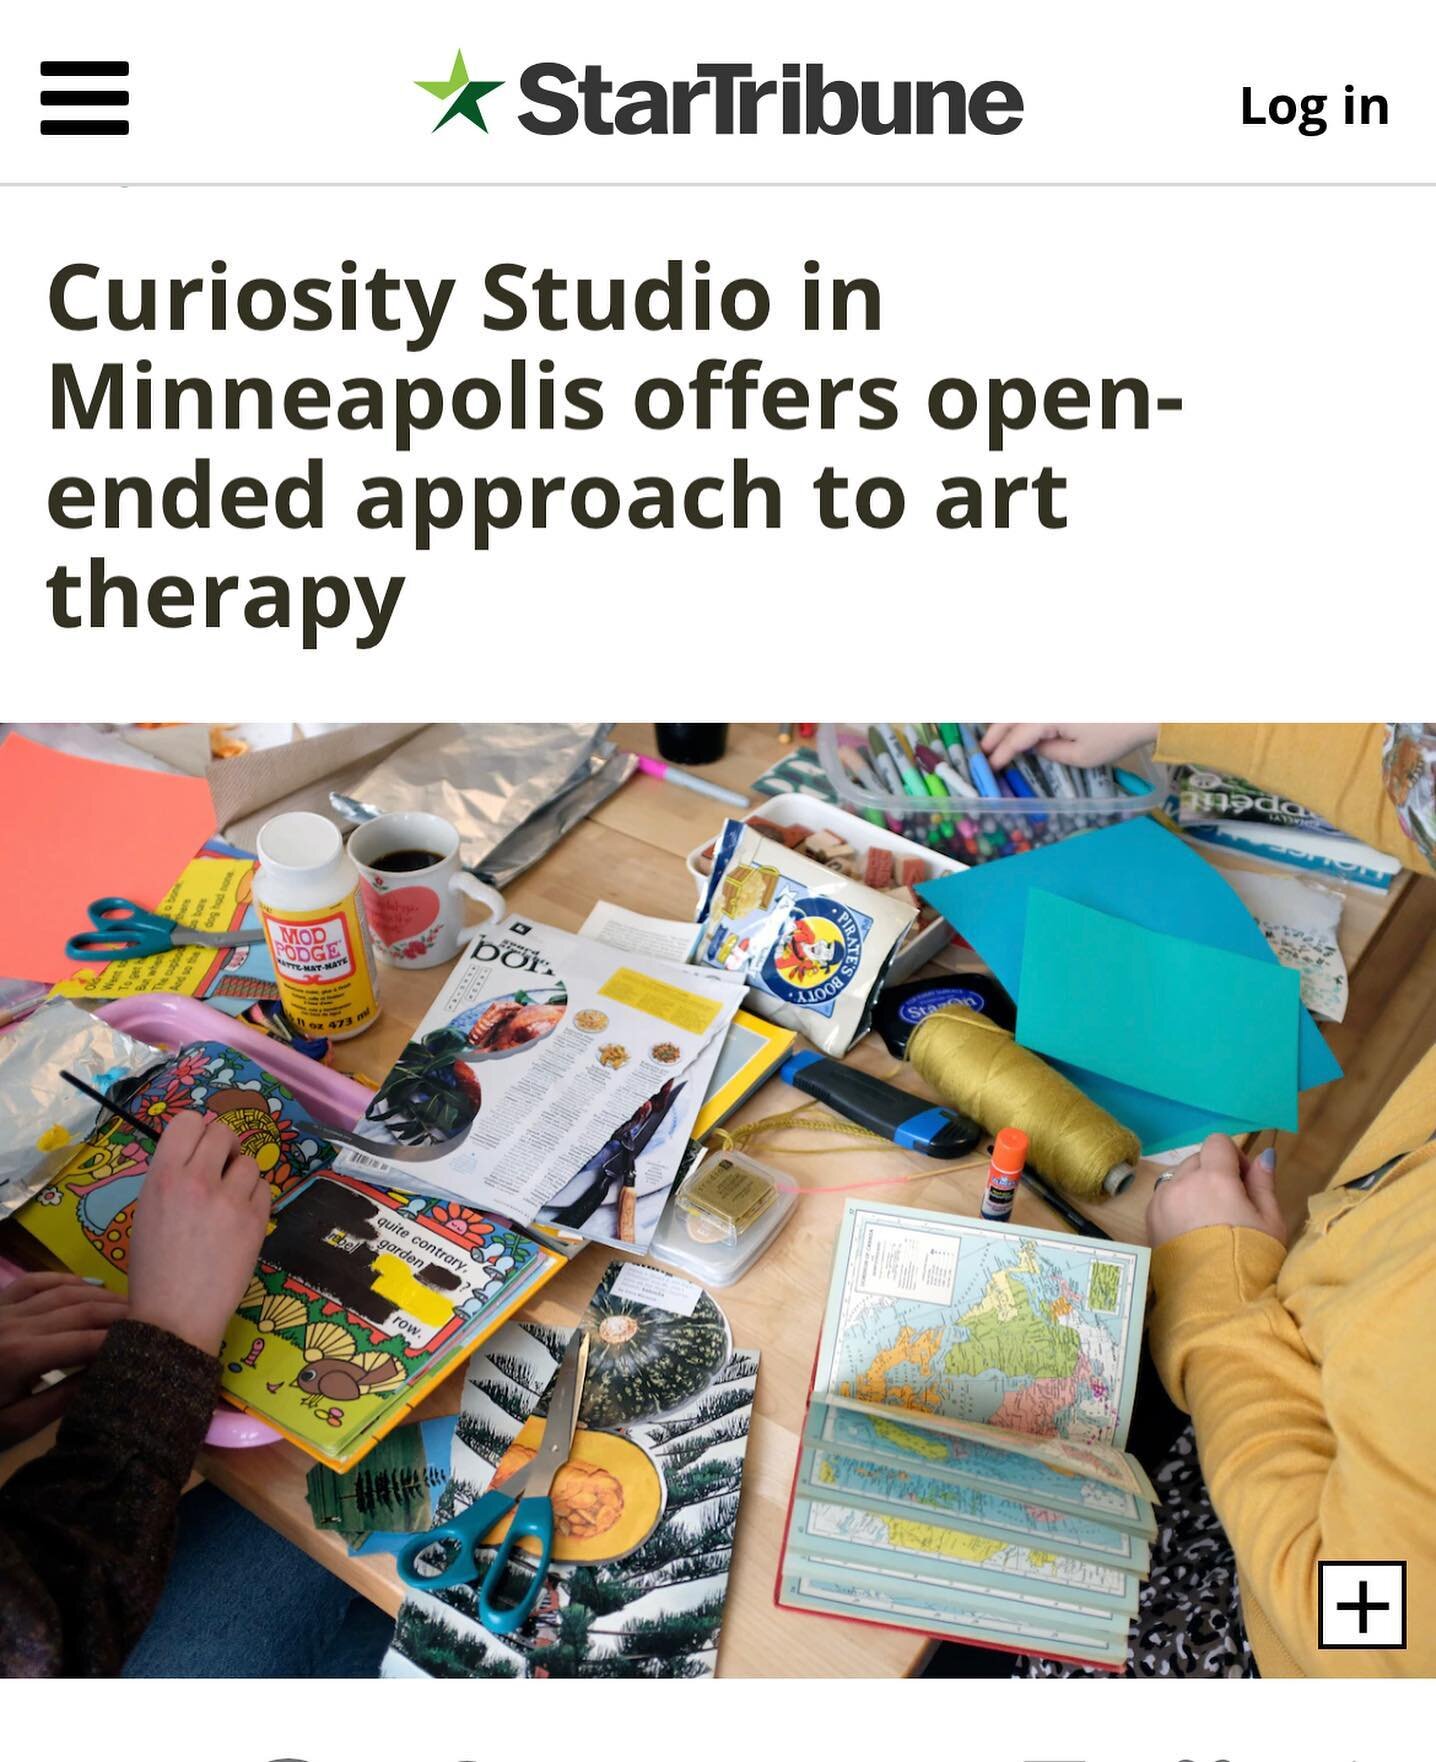 Learn more about Curiosity Studio in today&rsquo;s @startribune ! 

We love what we do!! Linked article in bio ✨

[Screenshot of Star Tribune article about curiosity studio. Headline states: &ldquo;Curiosity Studio in Minneapolis offers open ended ap